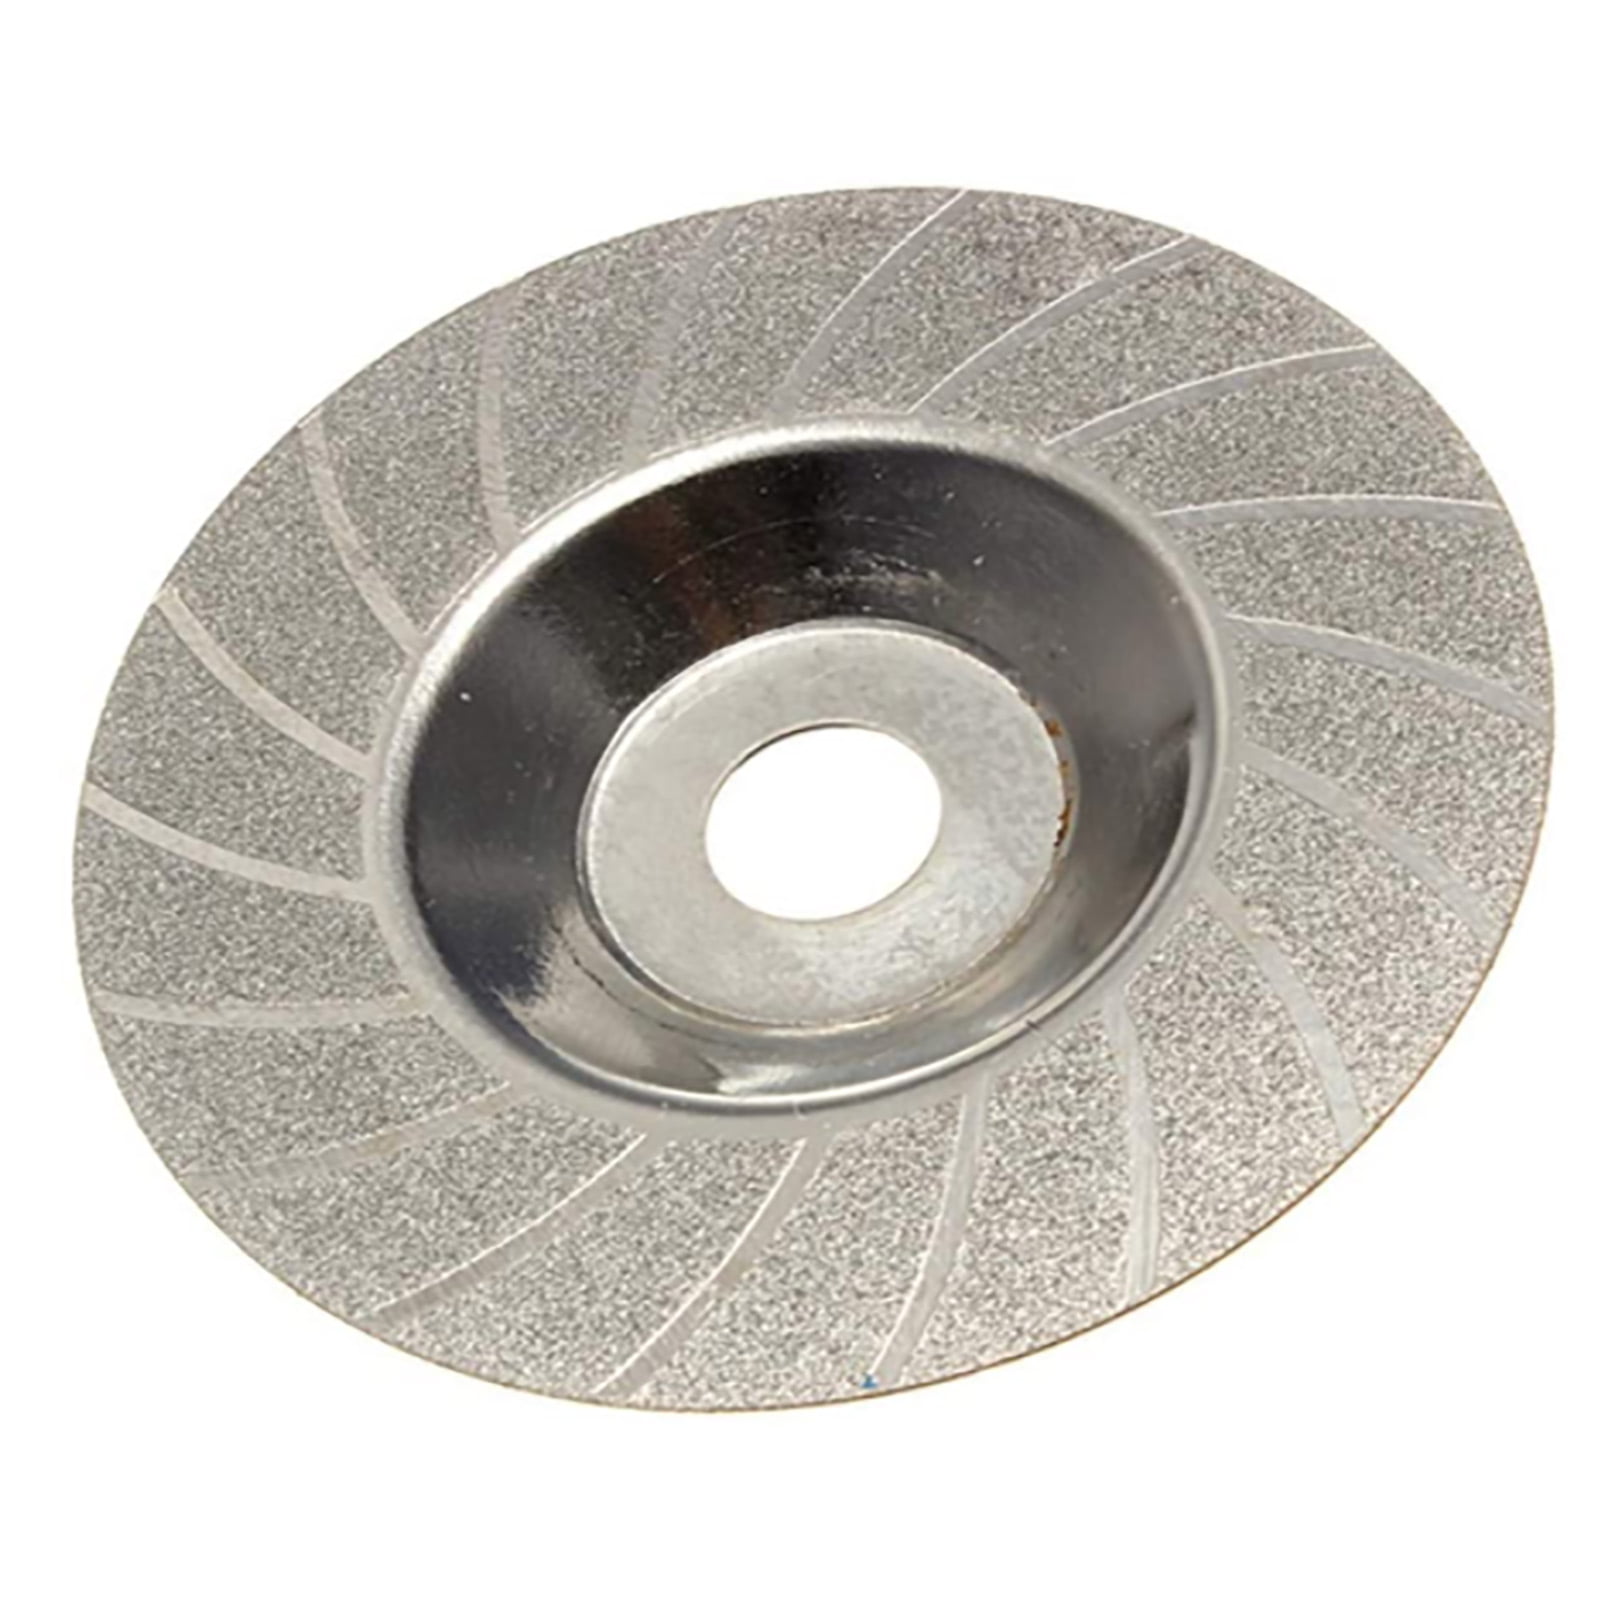 100mm Diamond Grinding Wheel Cutting Off Polishing Disc for Angle Grinder Grinde 